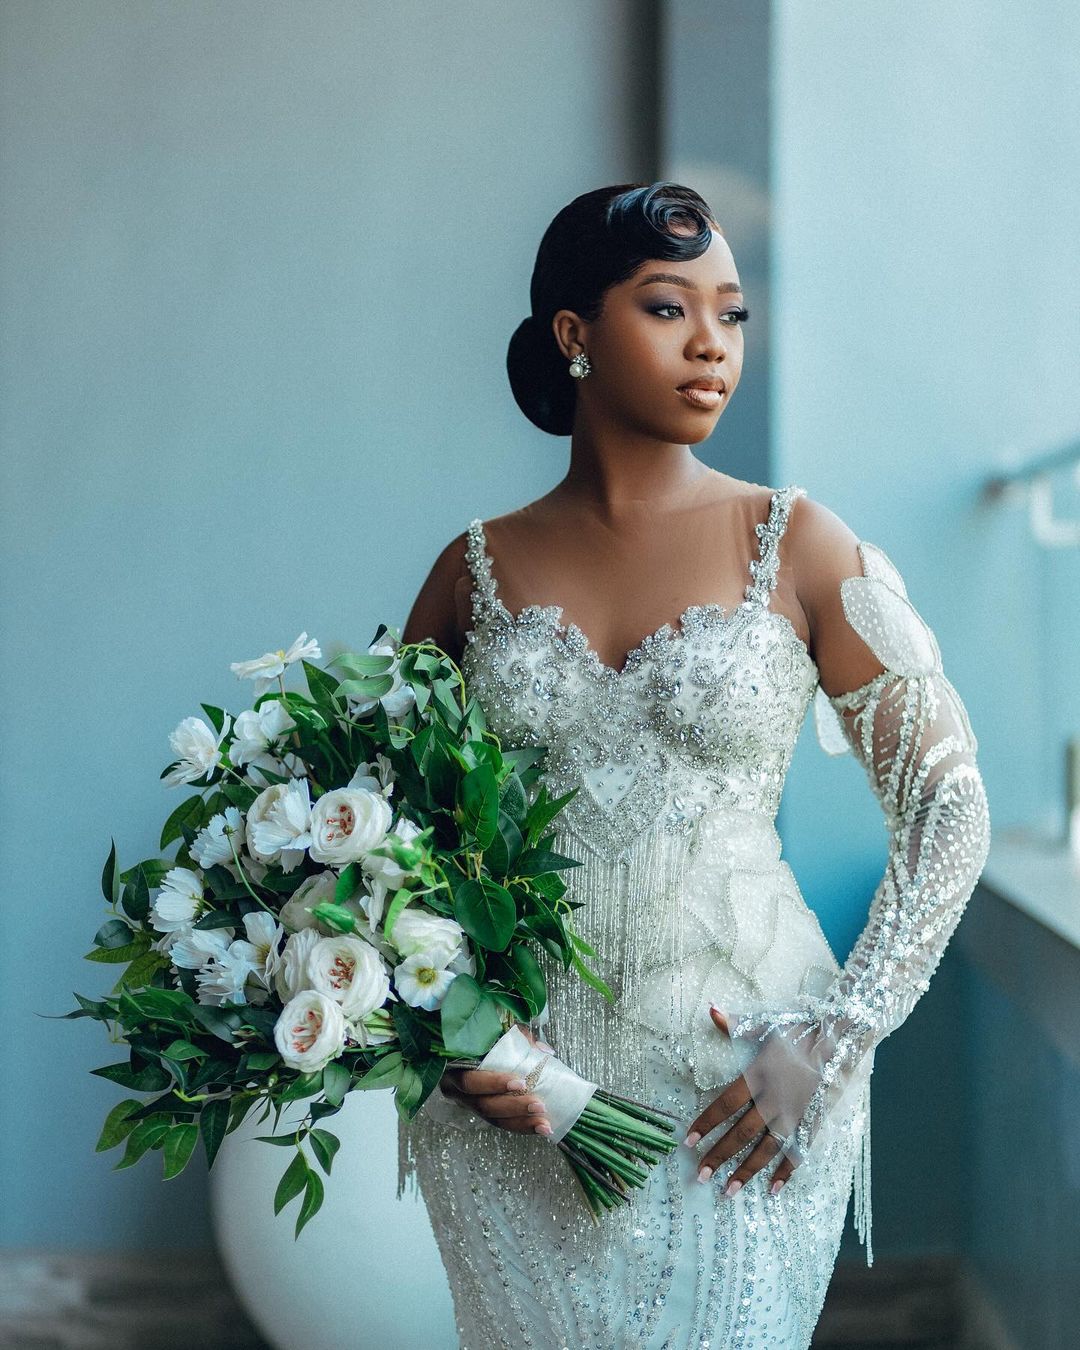 Exude a Classy Bridal Glow on Your Big Day With This Lovely Inspo